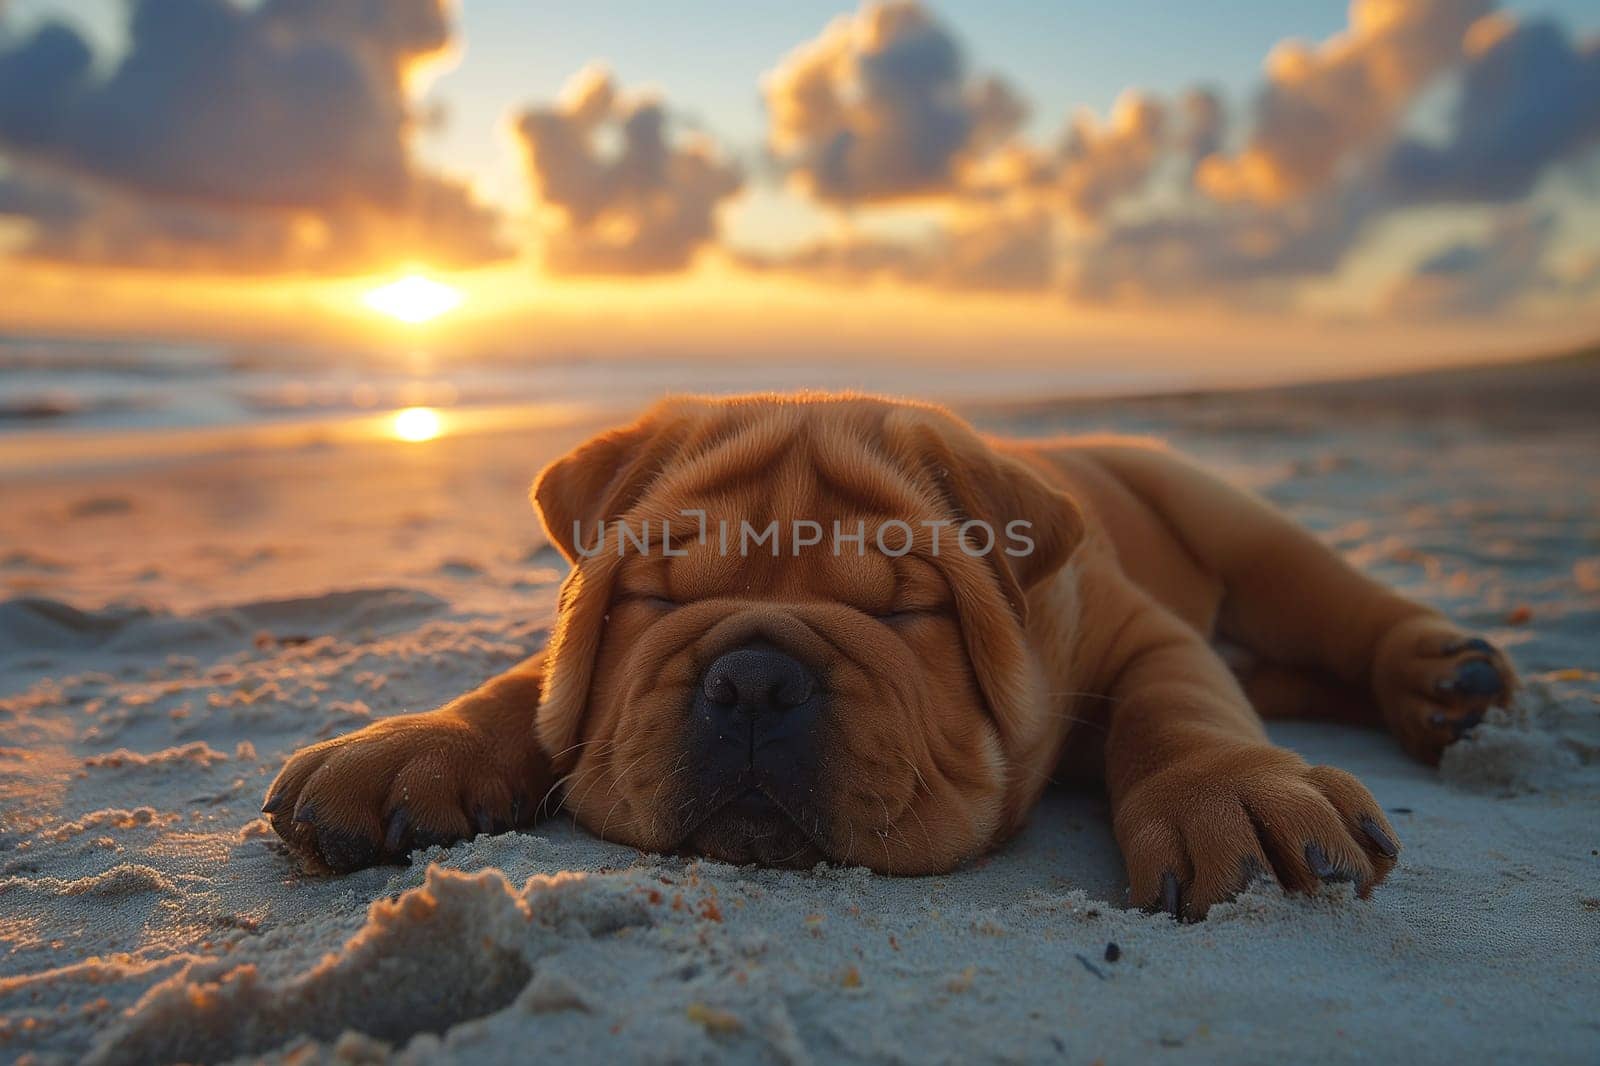 A sharpei relaxing and sleeping on the beach by Hype2art